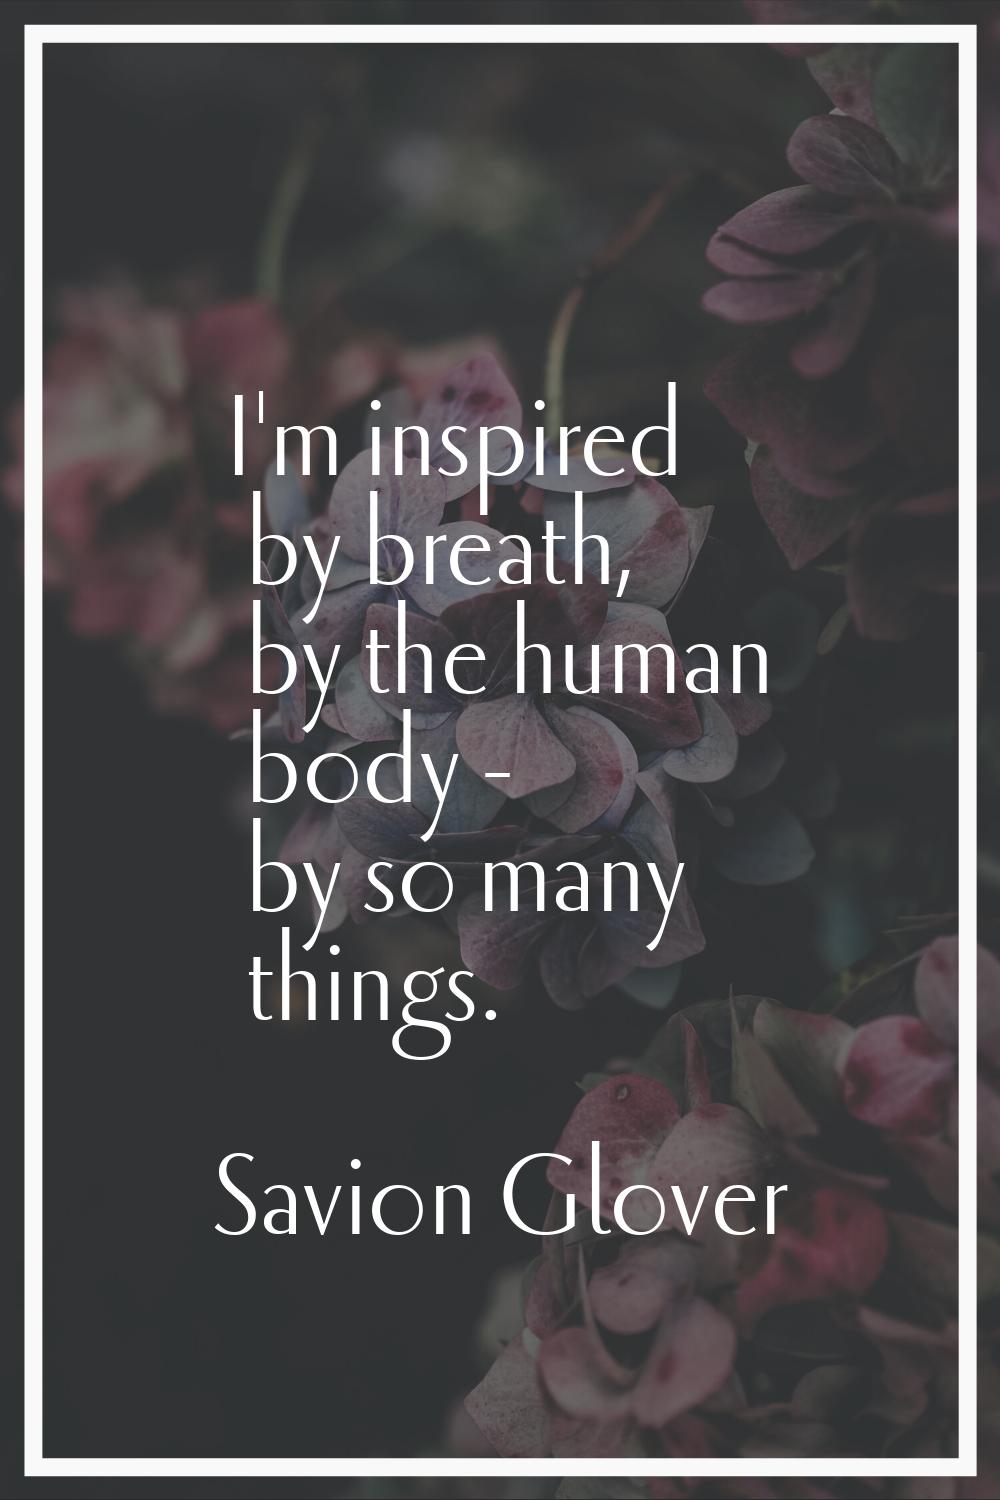 I'm inspired by breath, by the human body - by so many things.